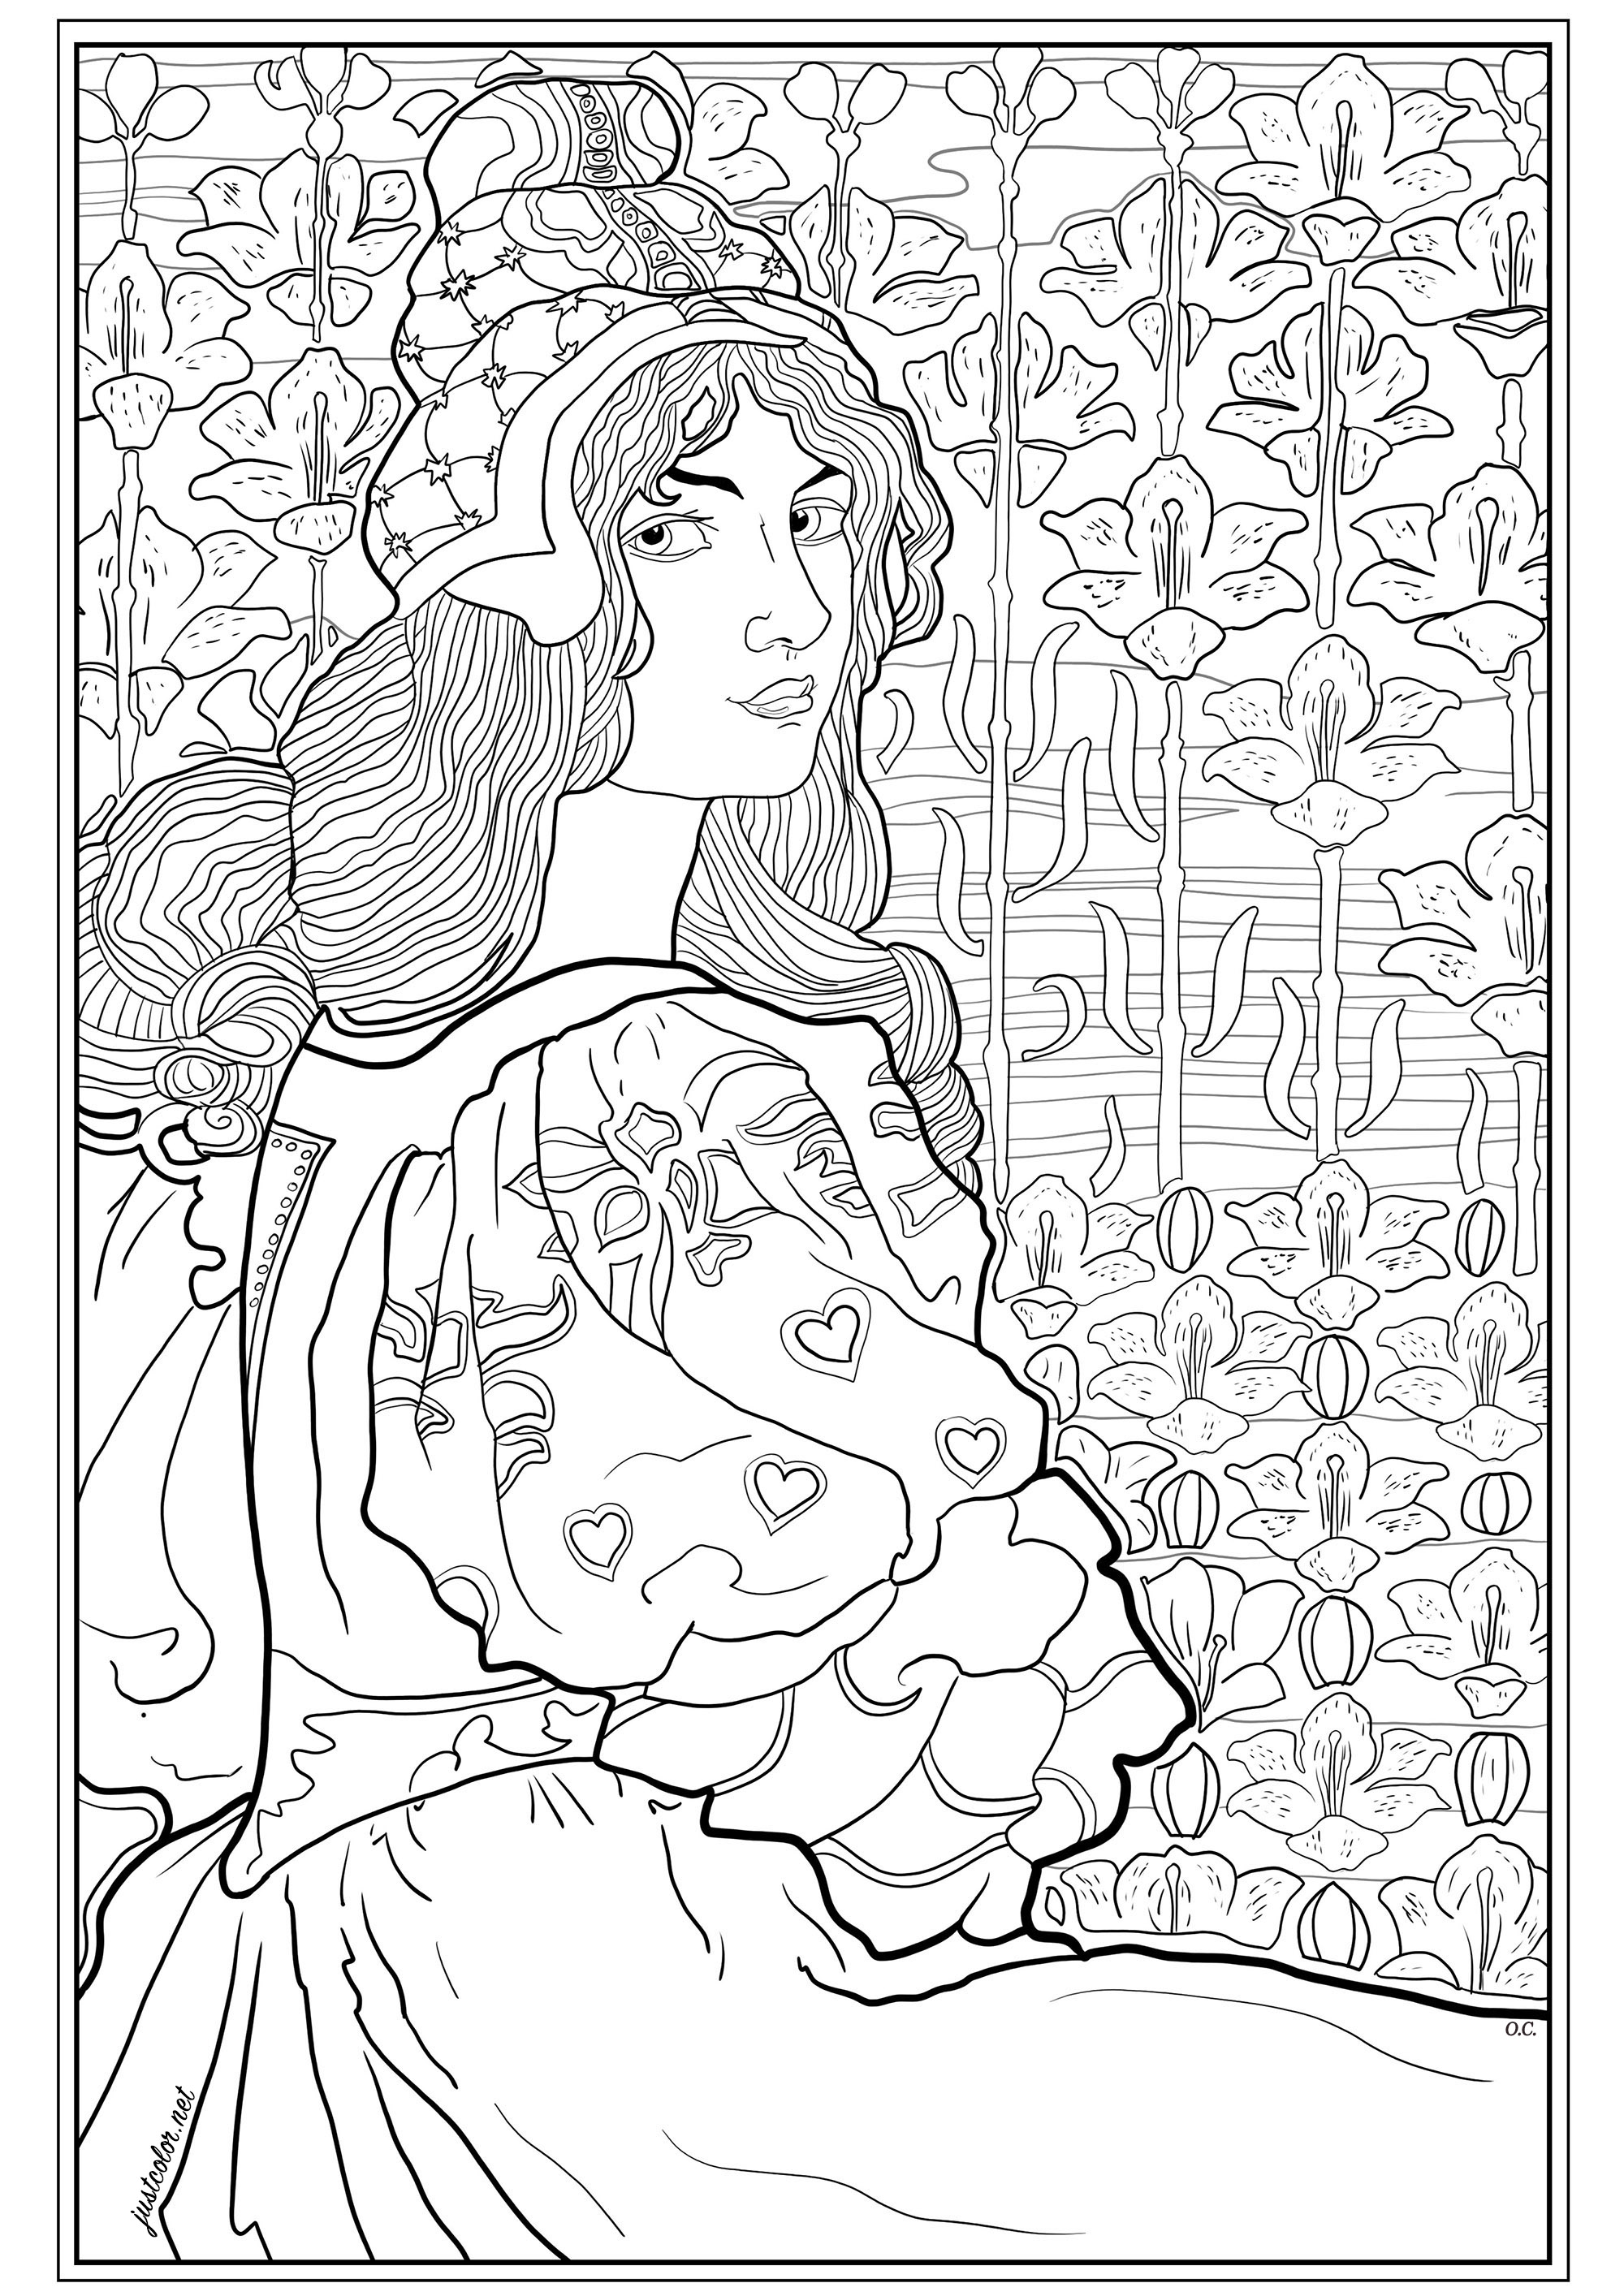 Coloring created from an original lithograph by Louis Rhead (1898). This illustration, published for L'Estampe Moderne, shows Jane, a young woman with long hair, against a background of stylized lilies, Artist : Olivier